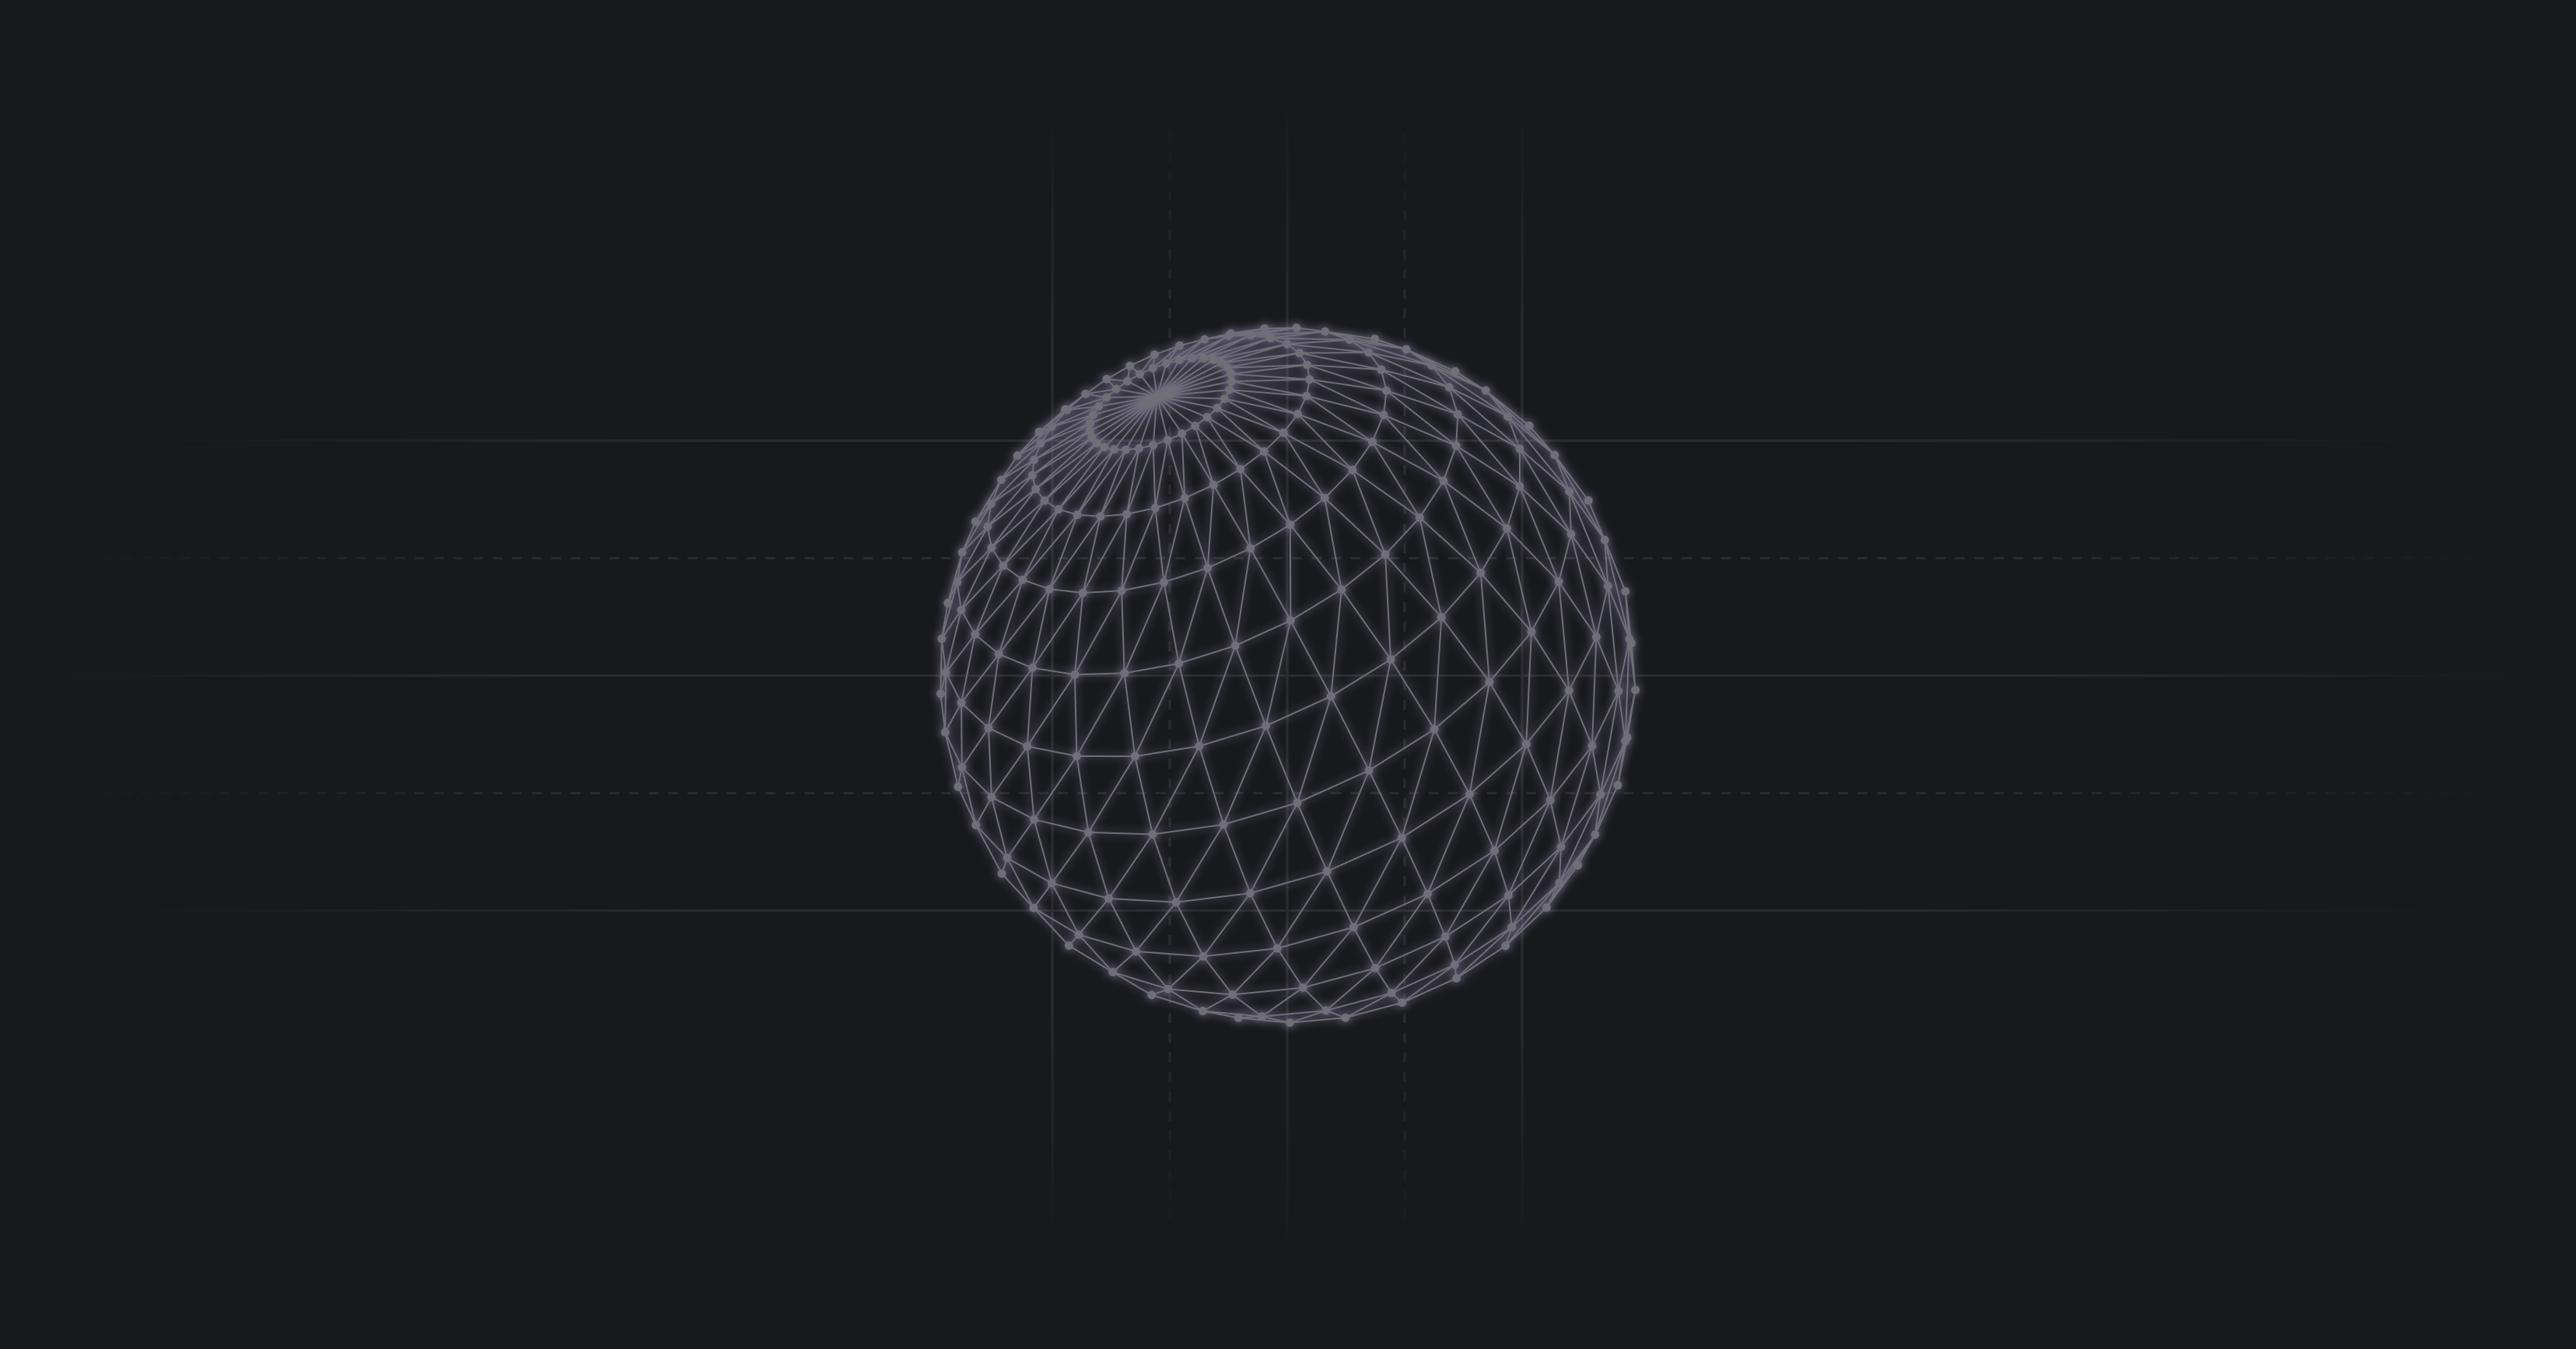 A globe-like stylized sphere with lines for longitude and latitude